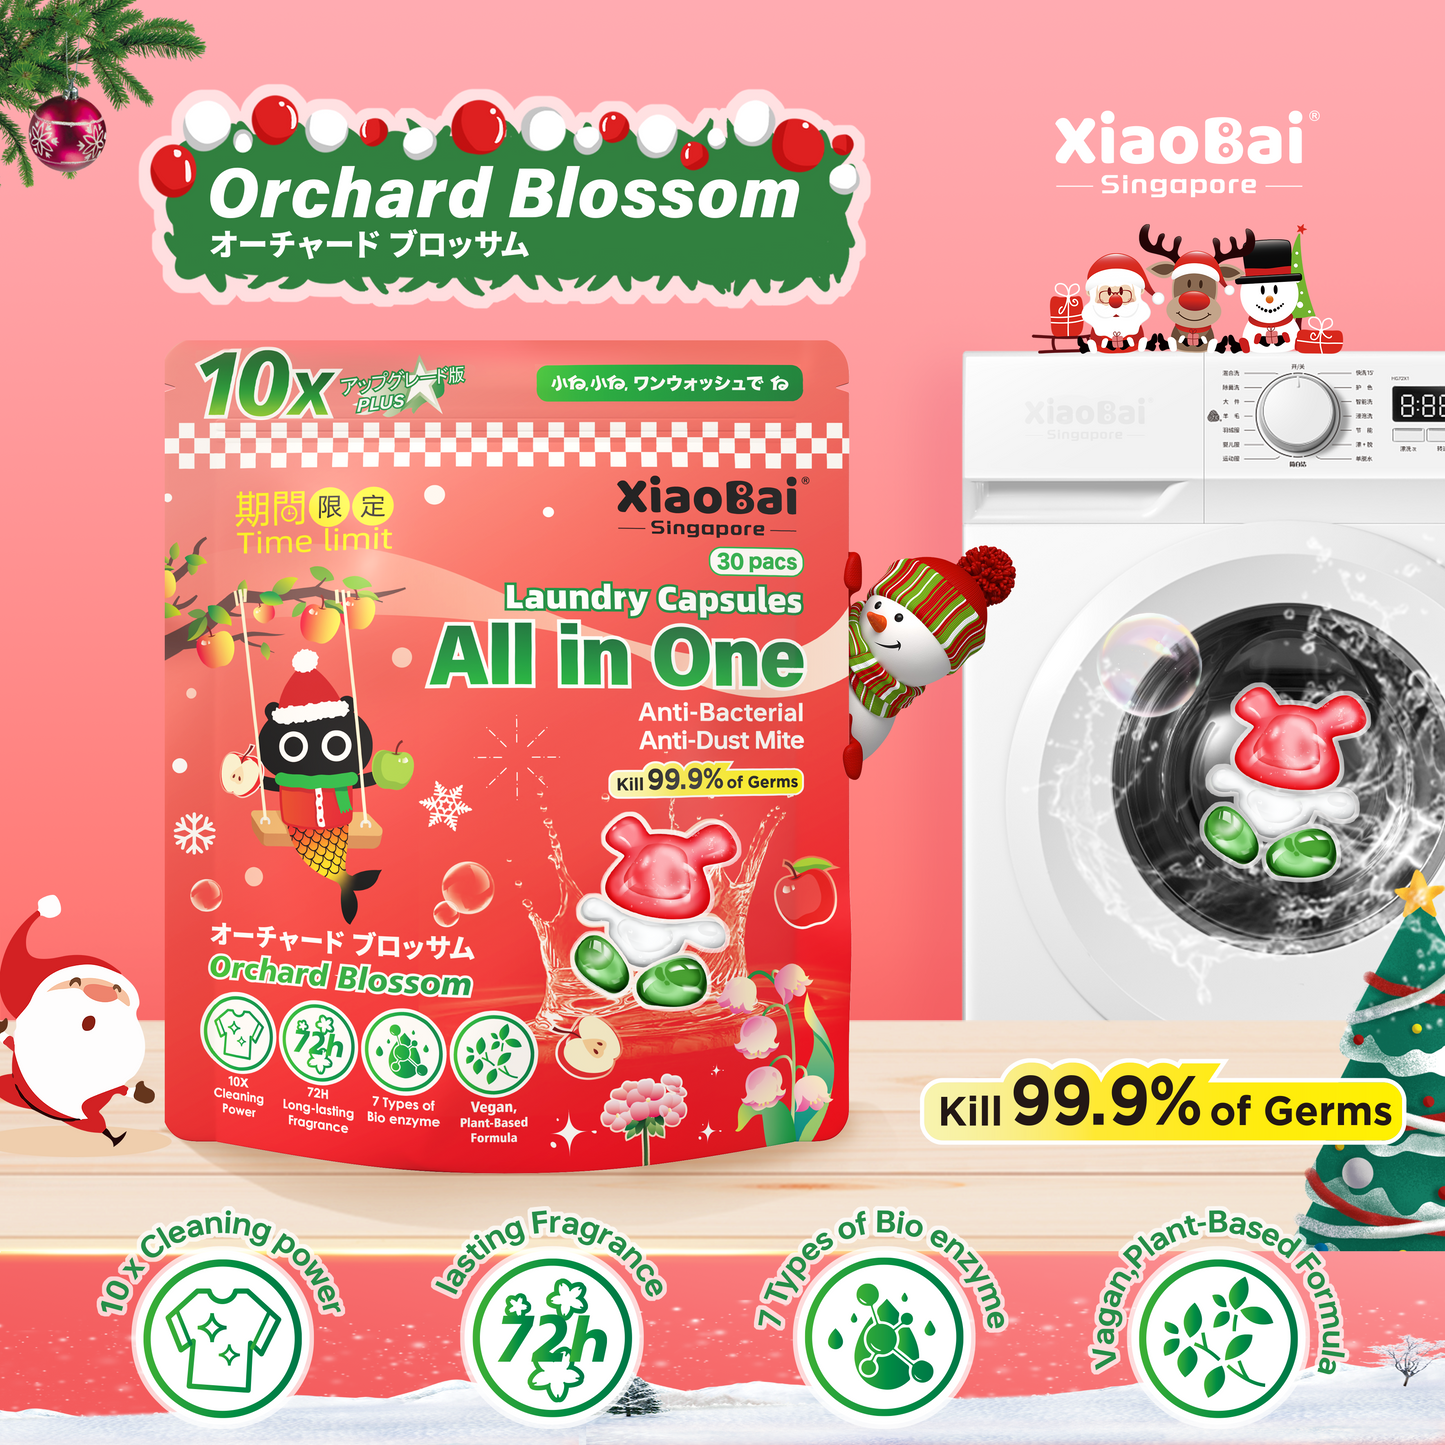 Limited edition 1 For 1 !!! XIAO BAI ALL IN ONE LAUNDRY CAPSULES -L7 Orchard Blossom